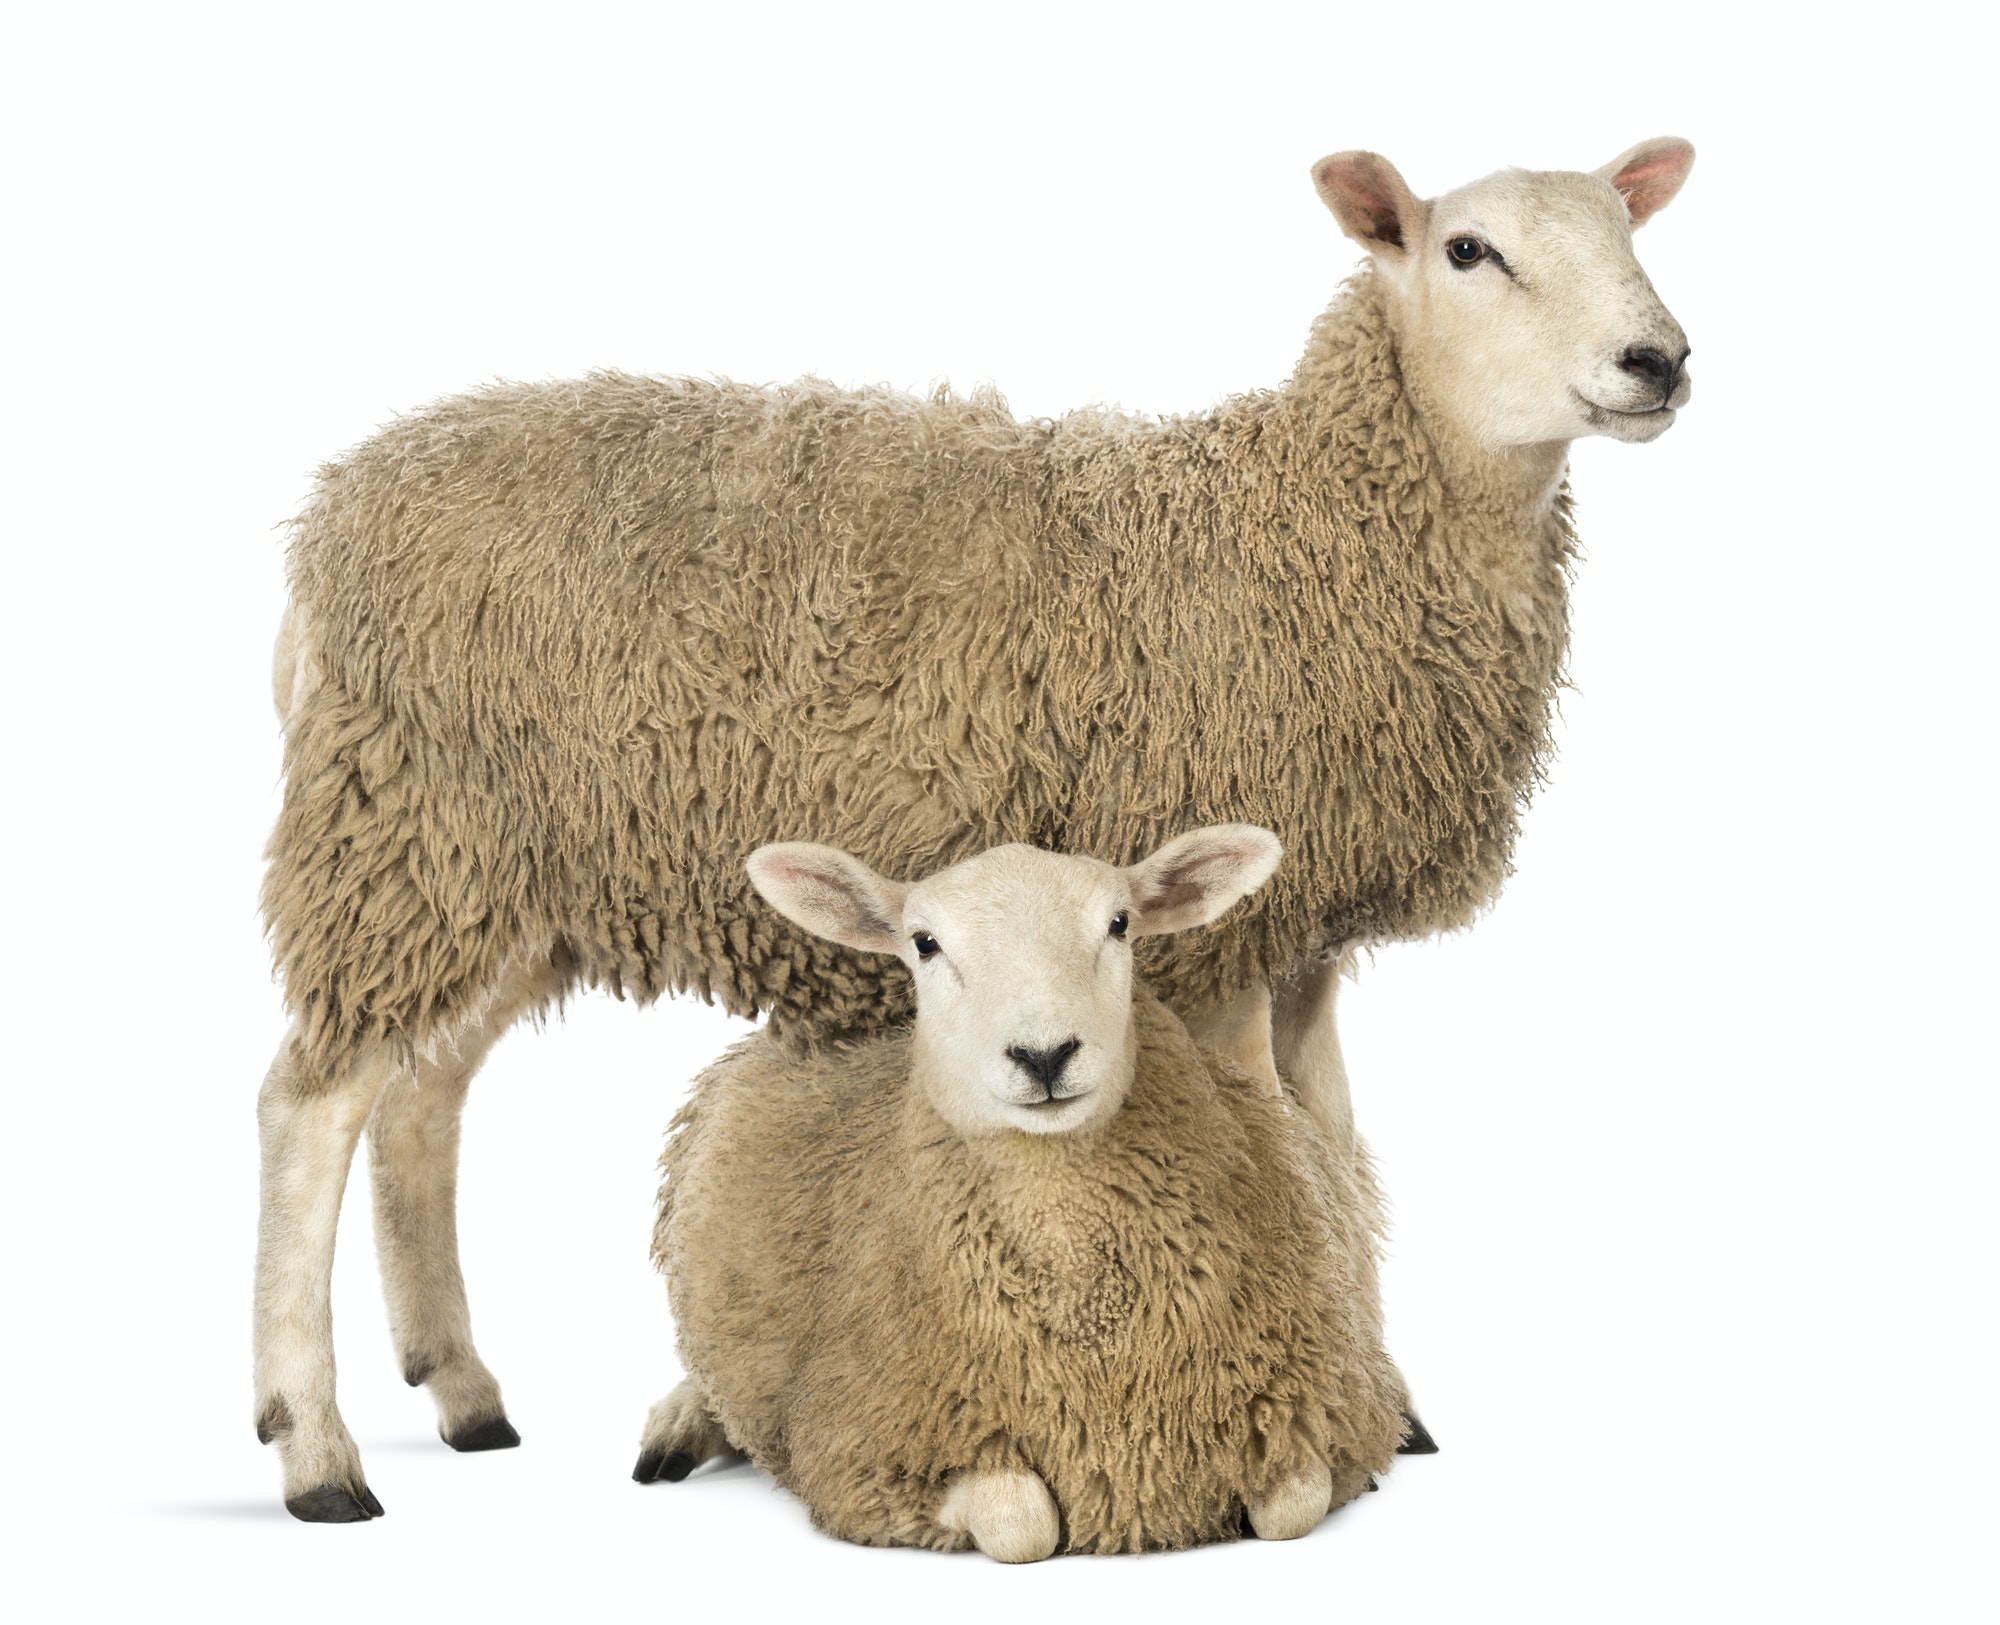 Sheep standing over another lying against white background